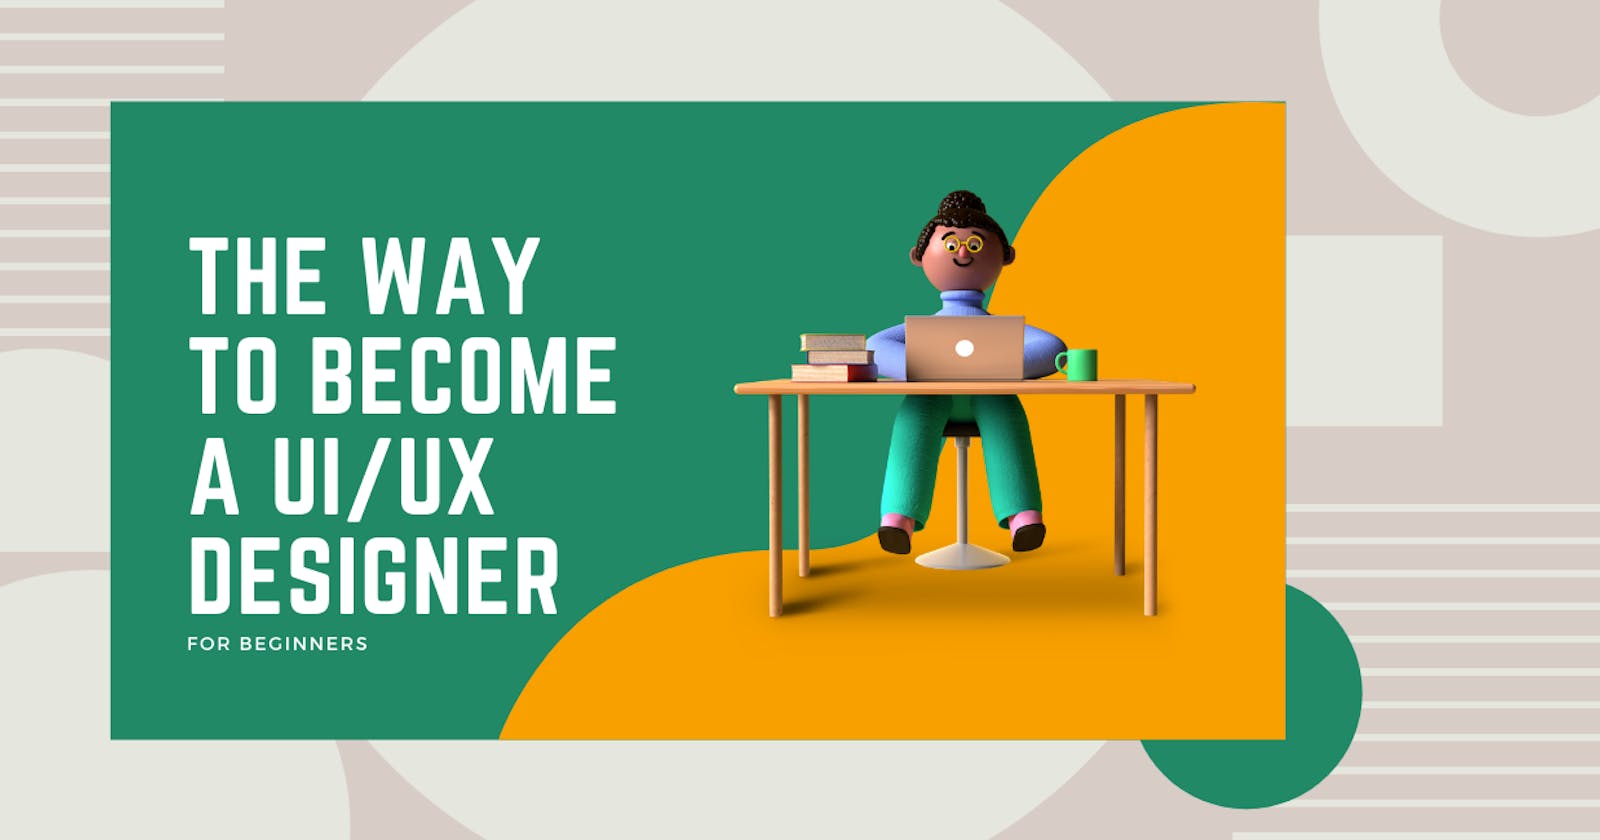 Are You Interesting in Design ? 
This is the way to become a UI/UX Designer